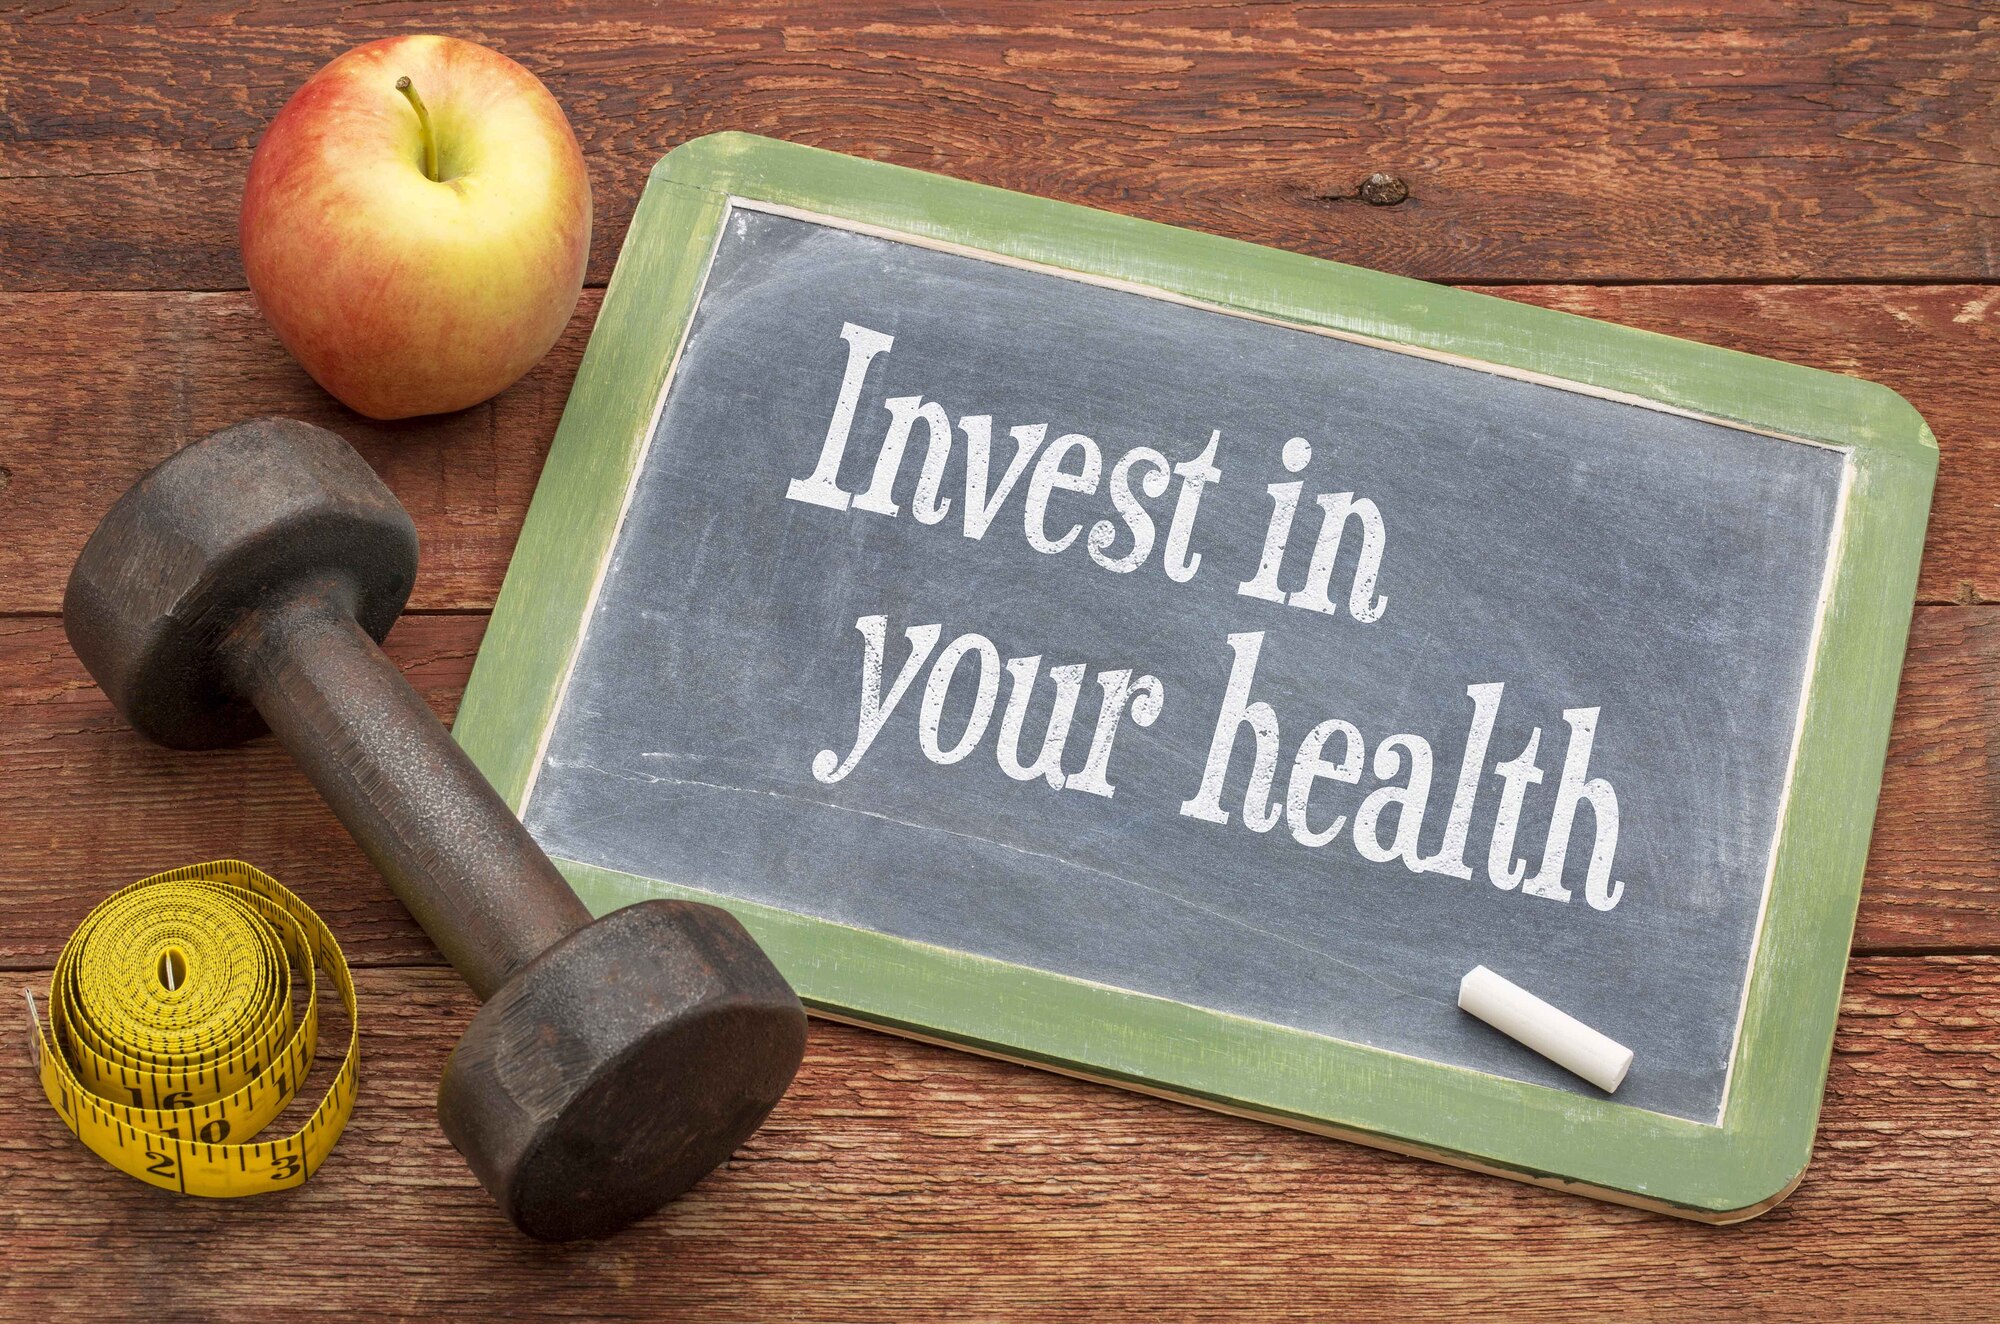 Graphic says "Invest in your health" written on a small chalkboard and has a dumb bell, measuring tape and apple next to it.